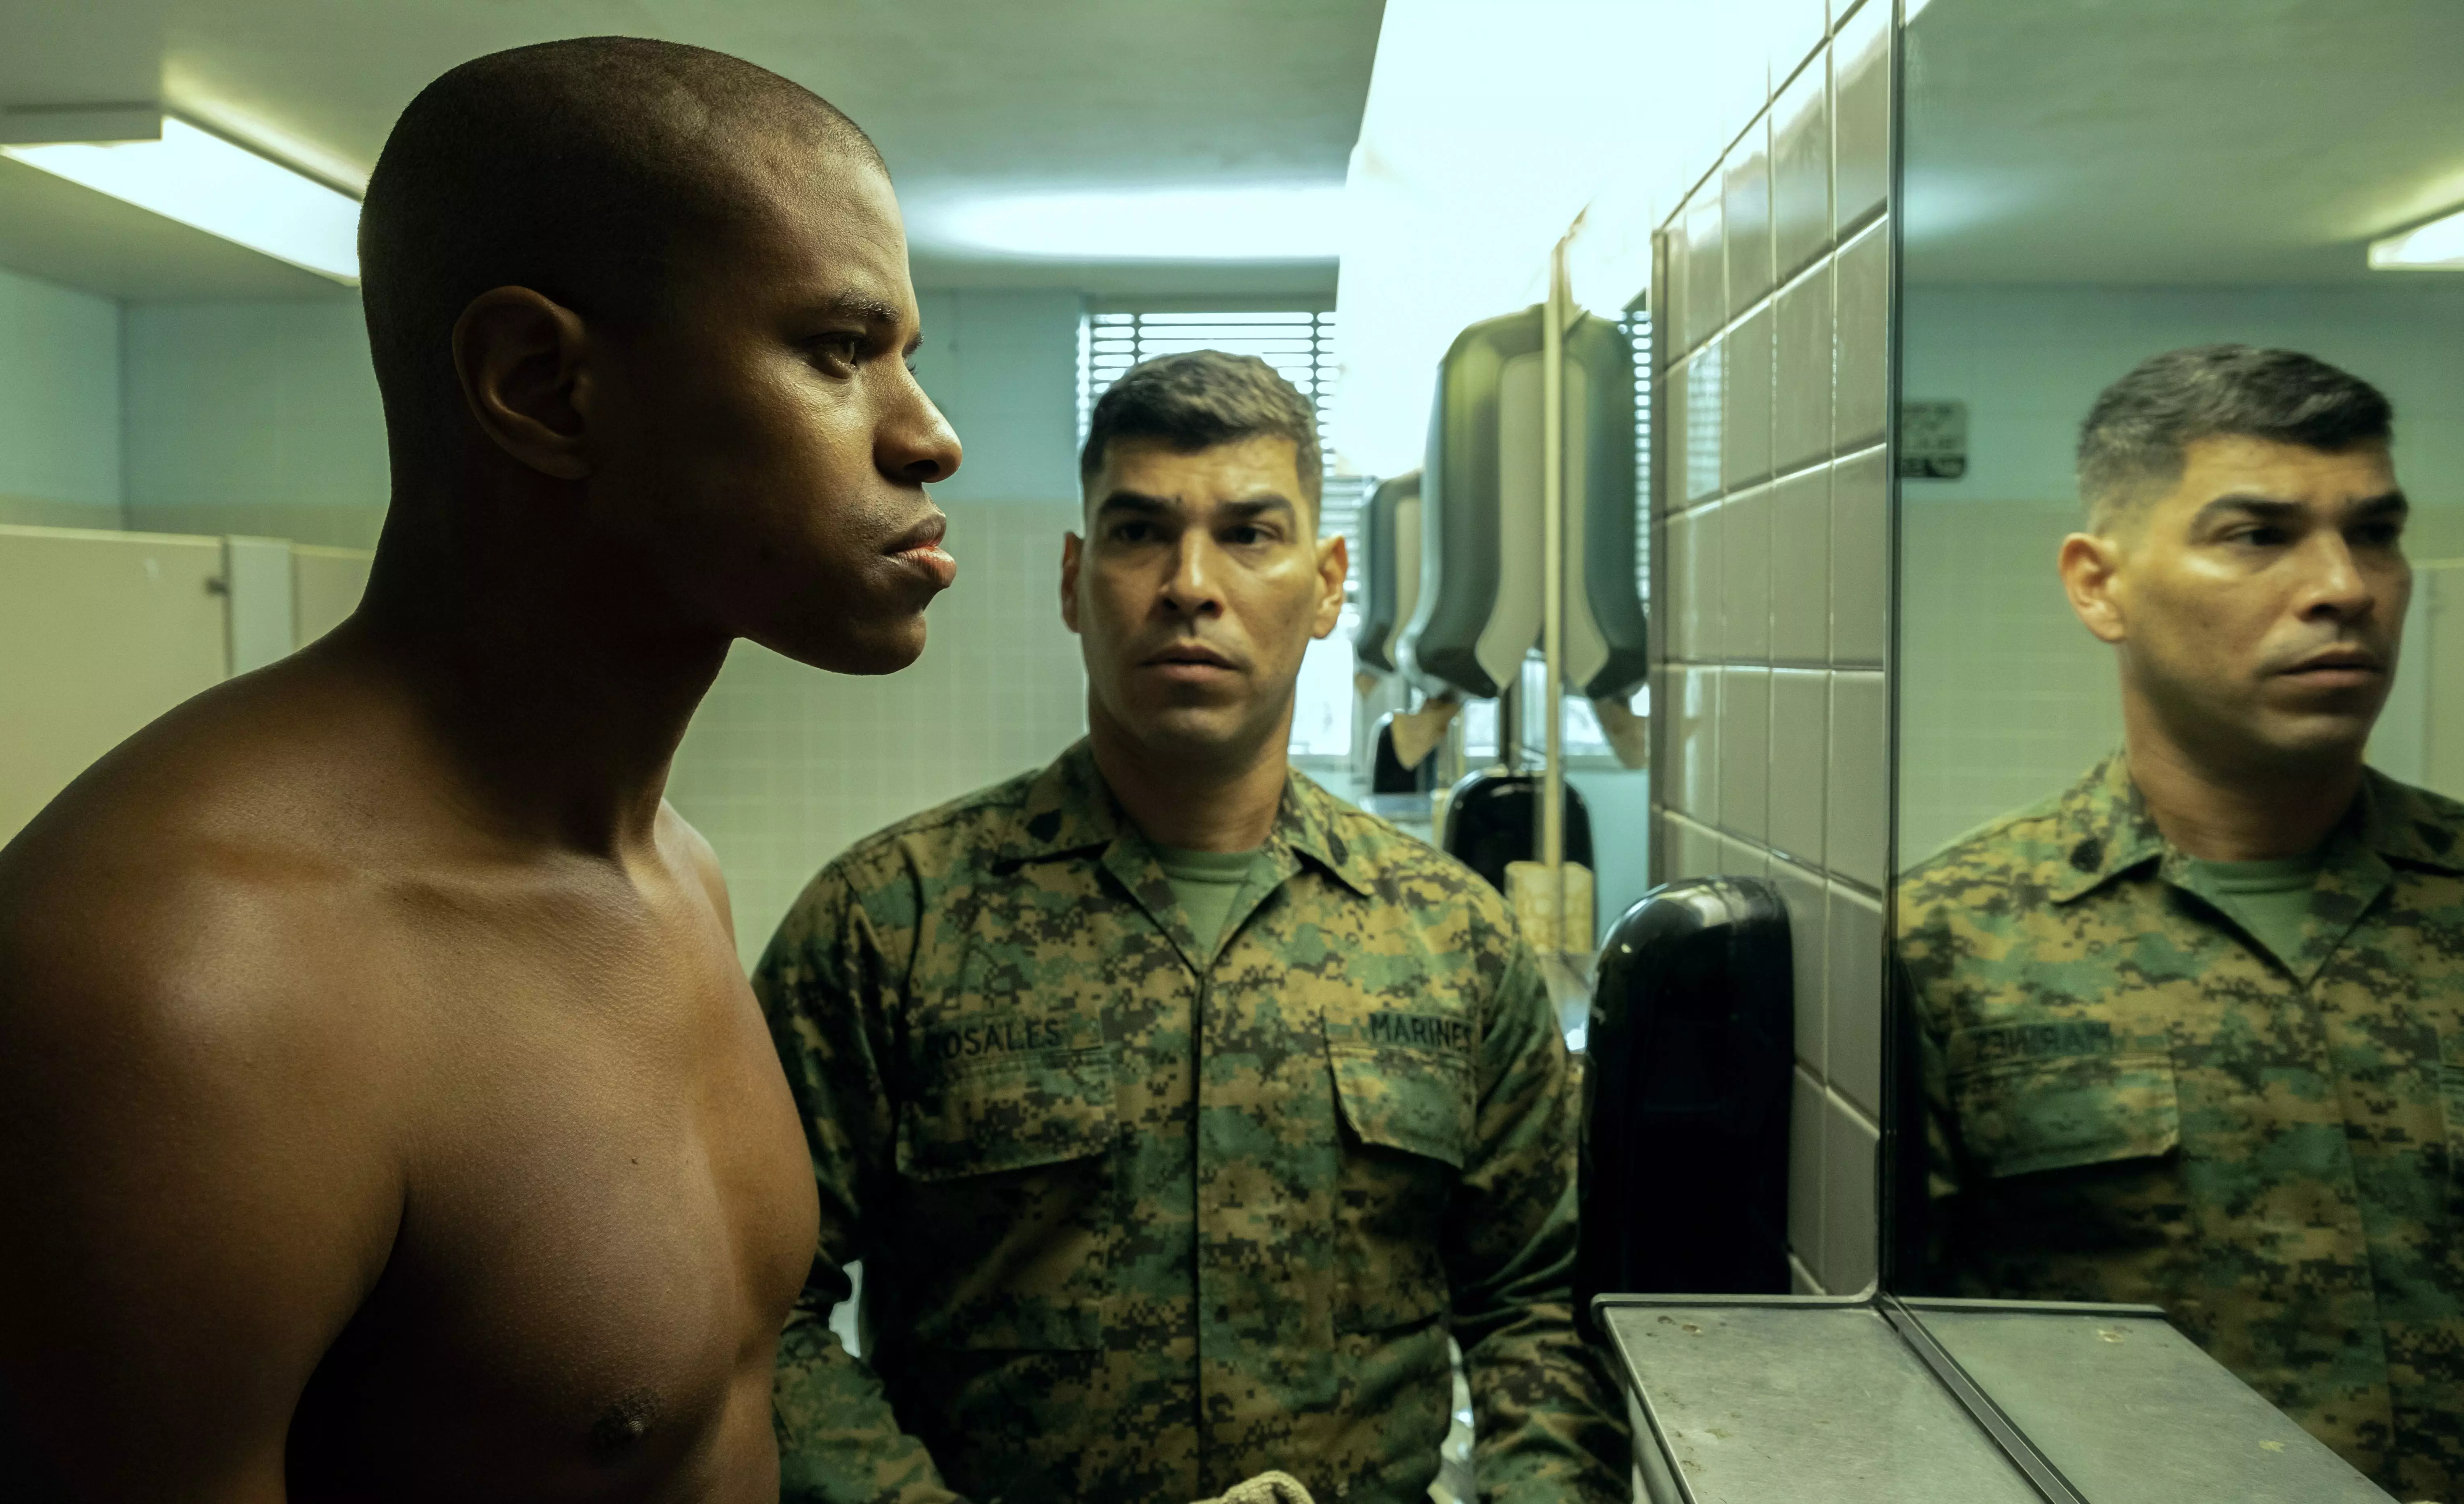 Jeremy Pope (left) stars as a gay Marine recruit who confides in a drill instructor (Raúl Castillo) during boot camp in "The Inspection."